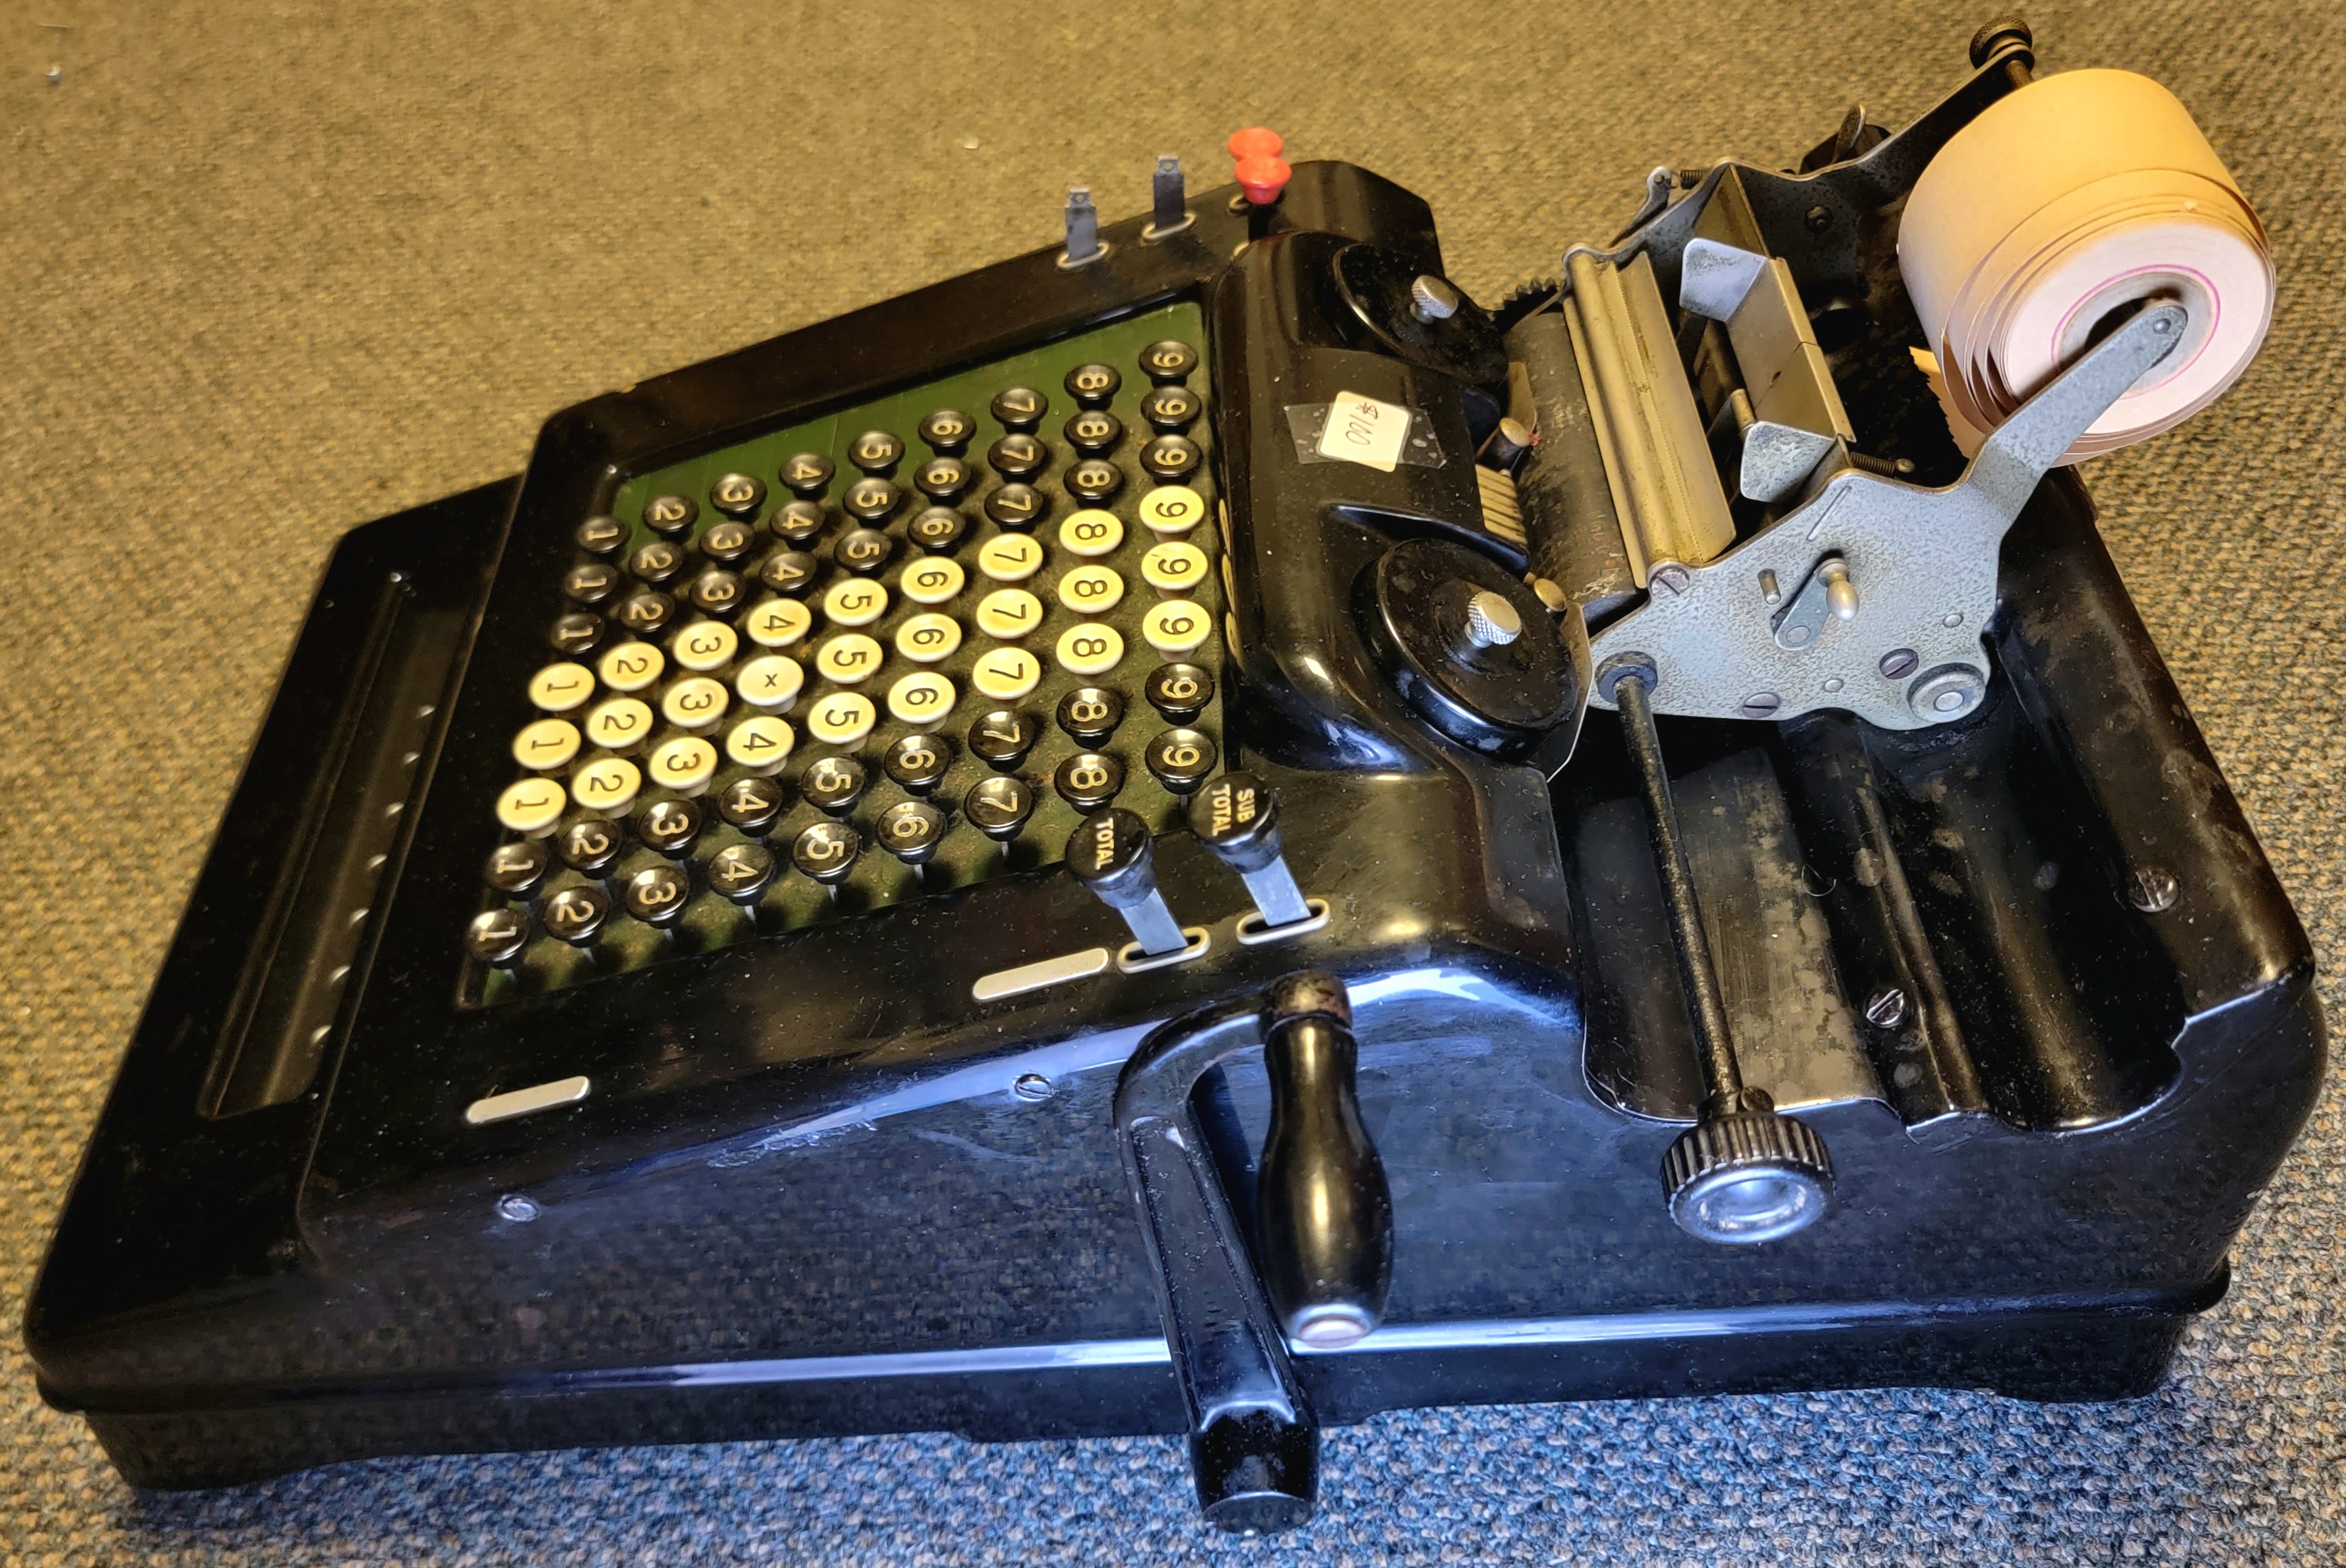 Side view of a Burroughs adding machine